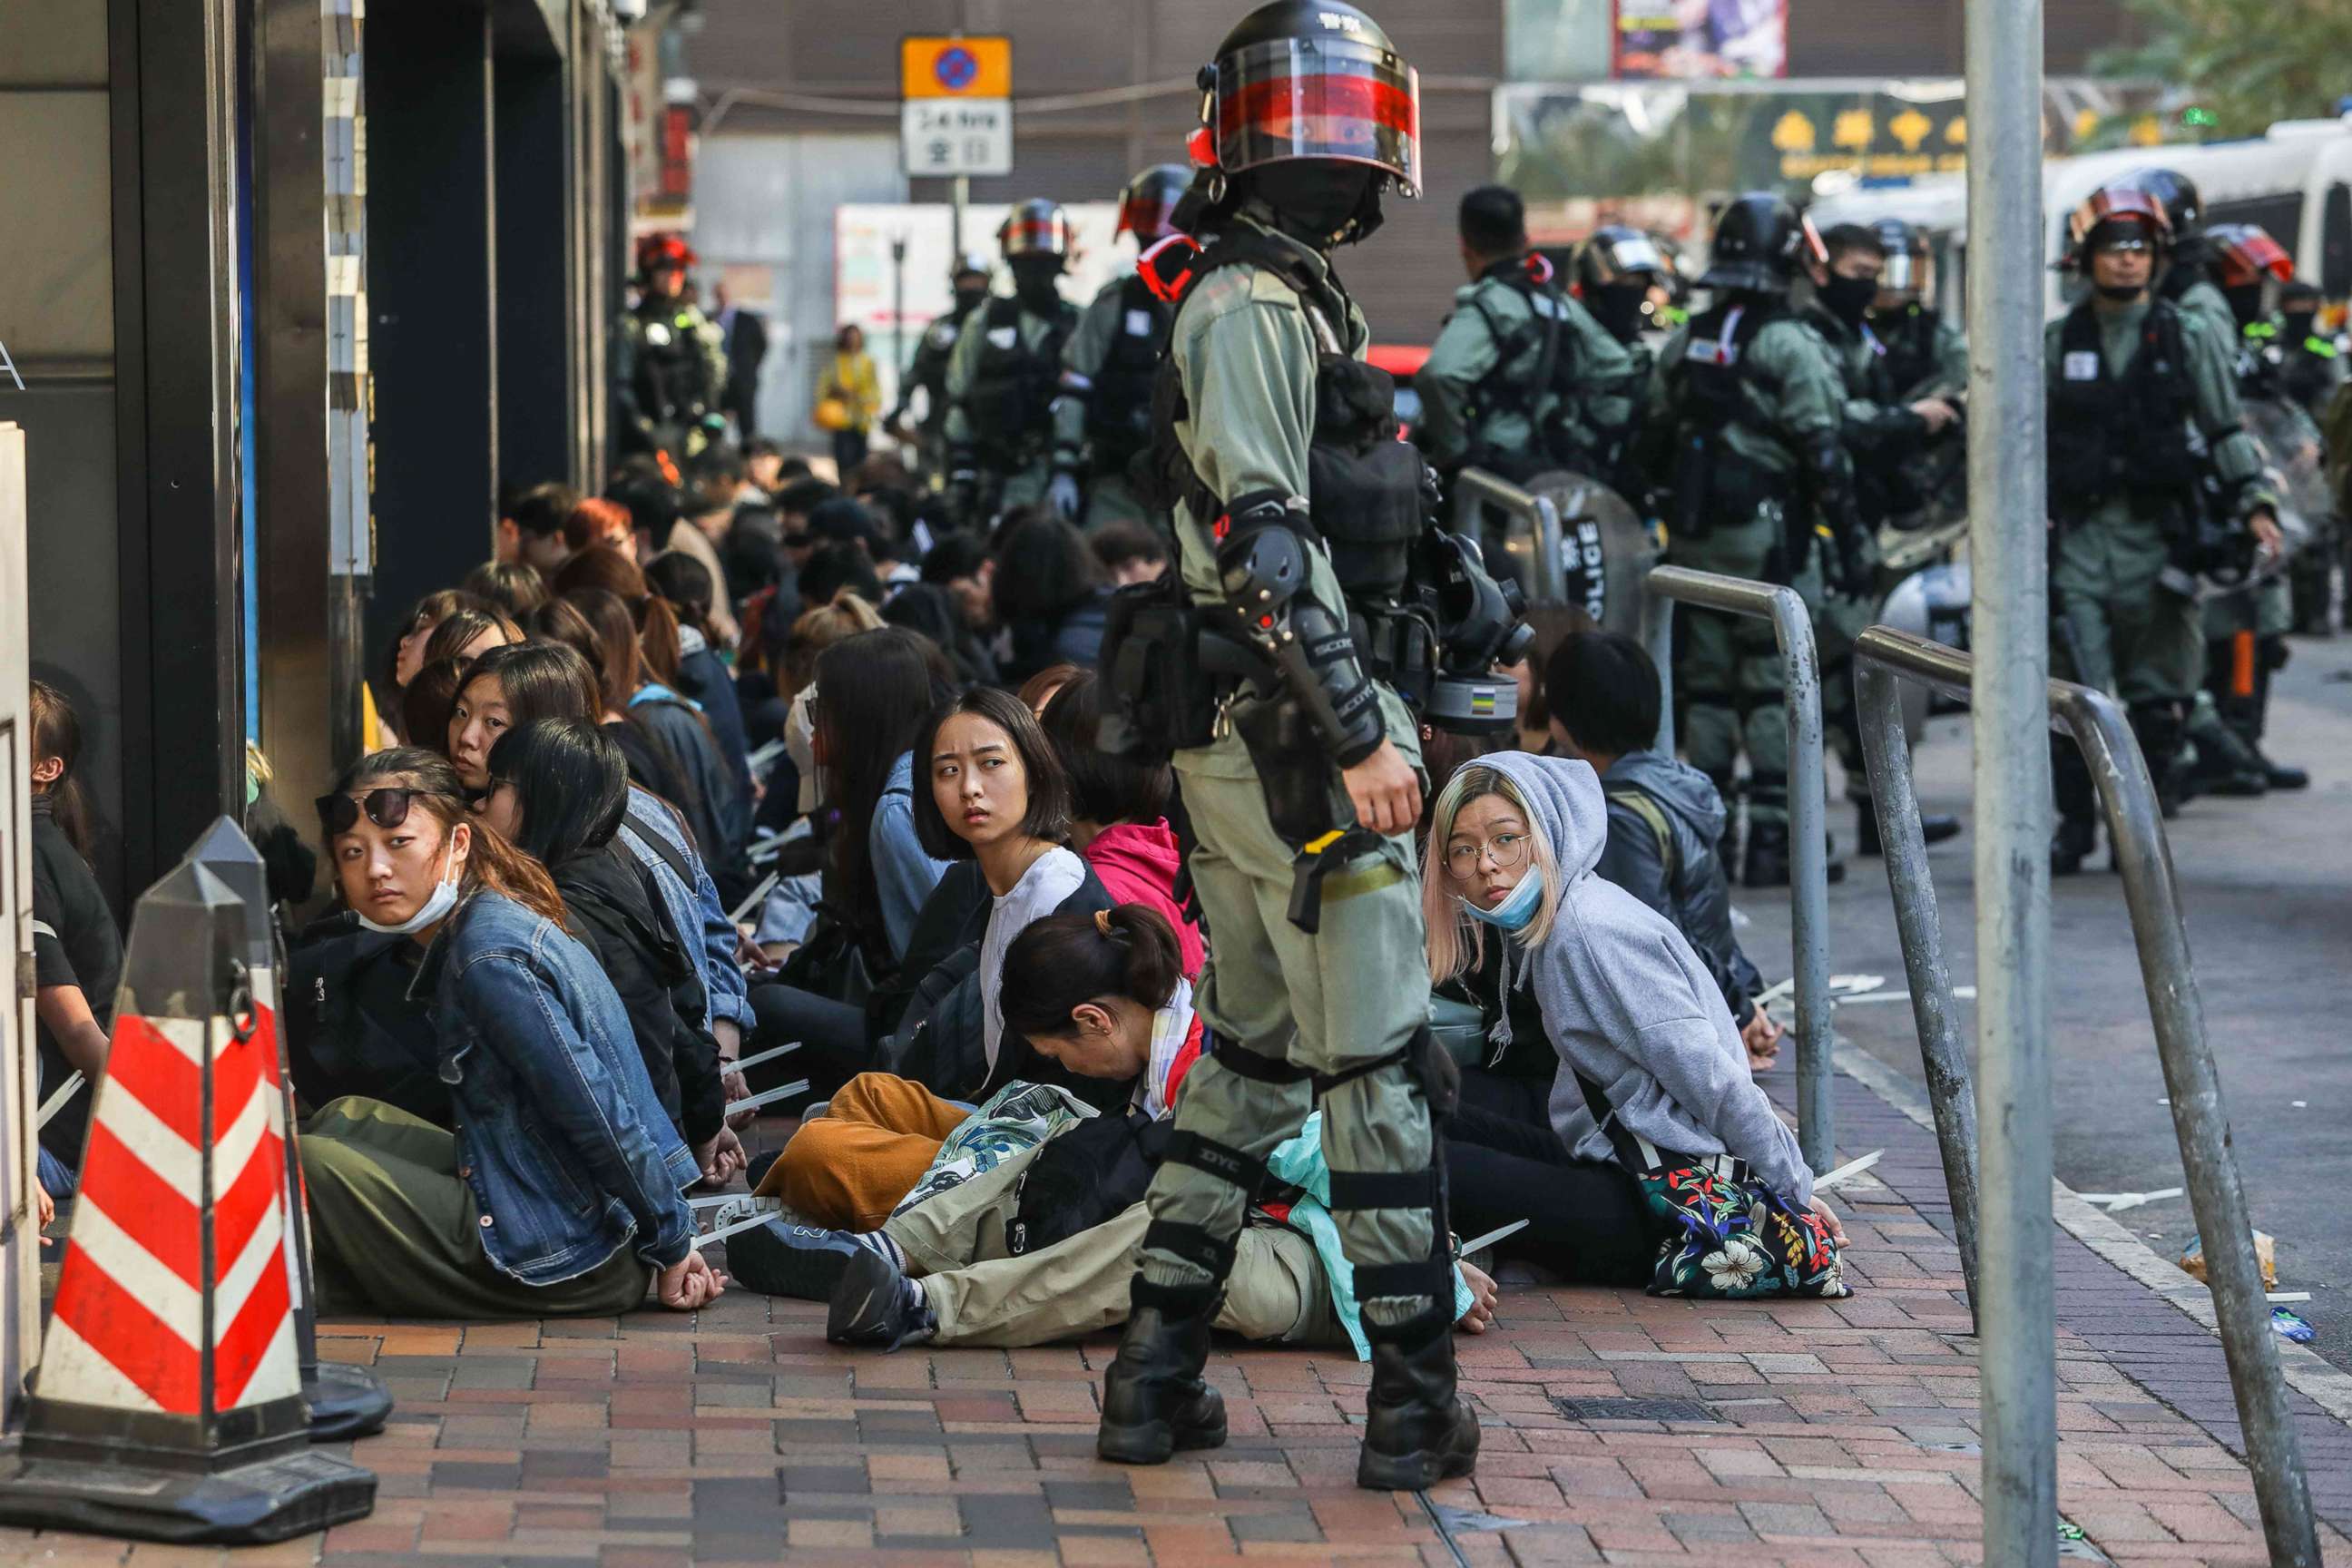 PHOTO: People are detained by police near the Hong Kong Polytechnic University in Hung Hom district of Hong Kong on Nov. 18, 2019.